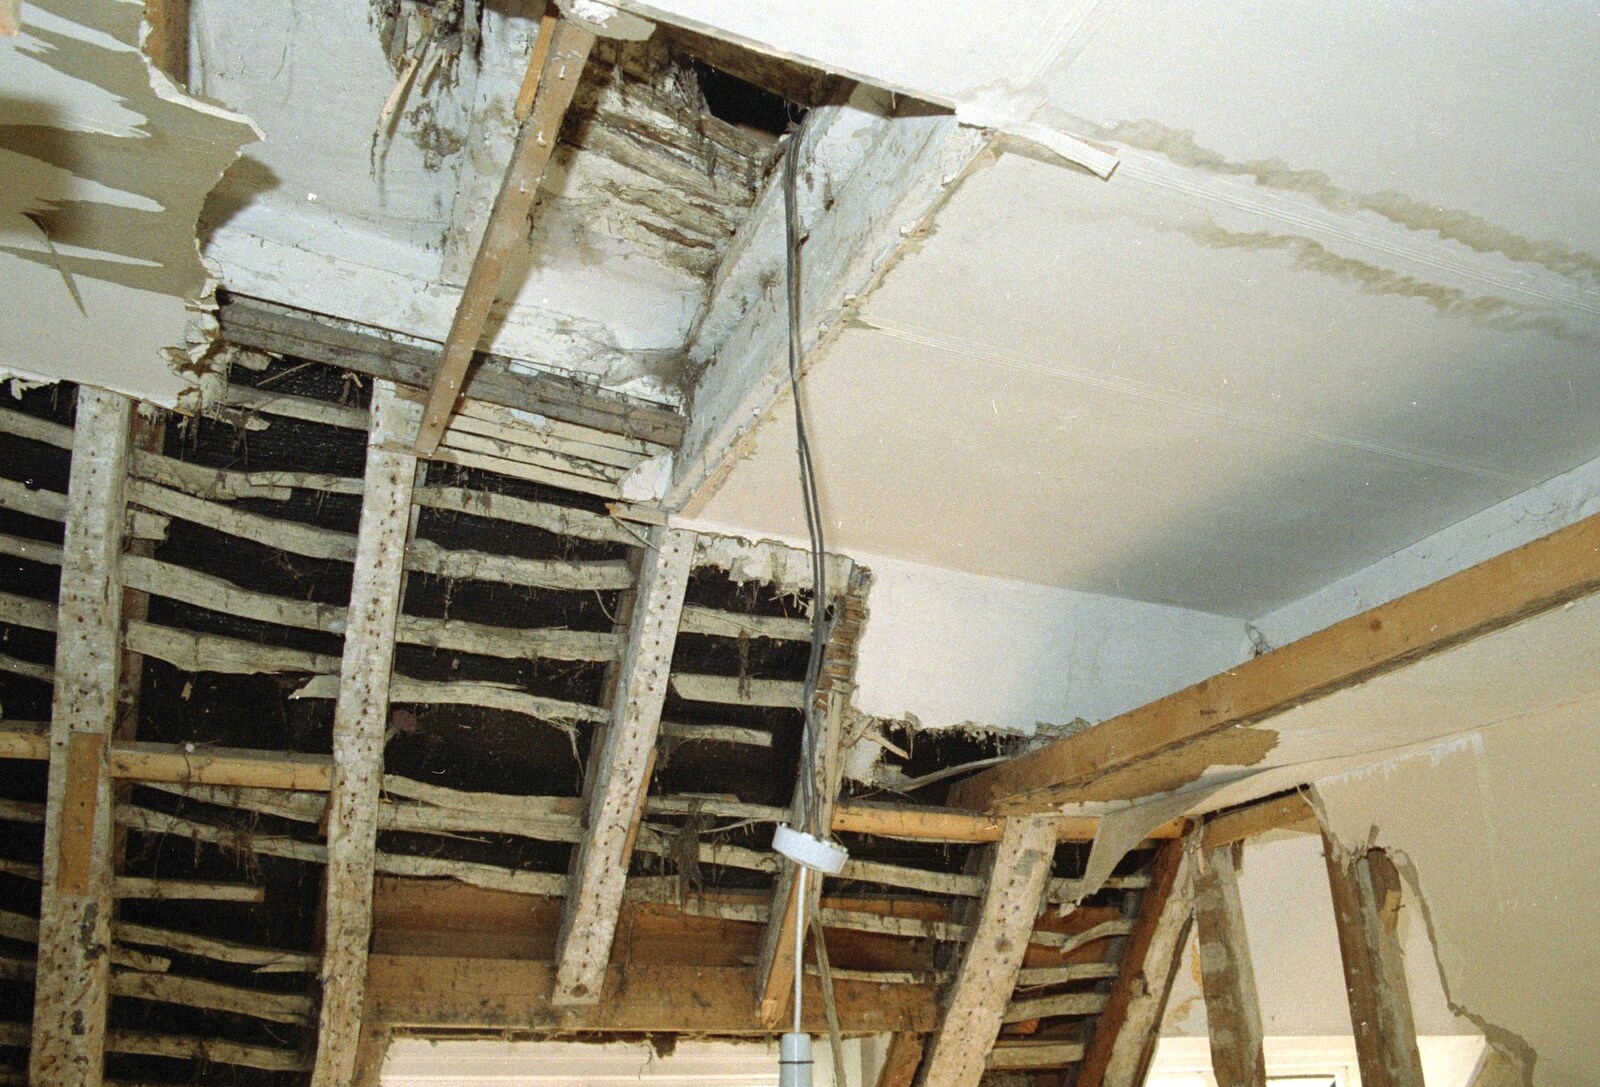 All three ceilings can be seen from Bedroom Demolition, Brome, Suffolk - 15th May 1995